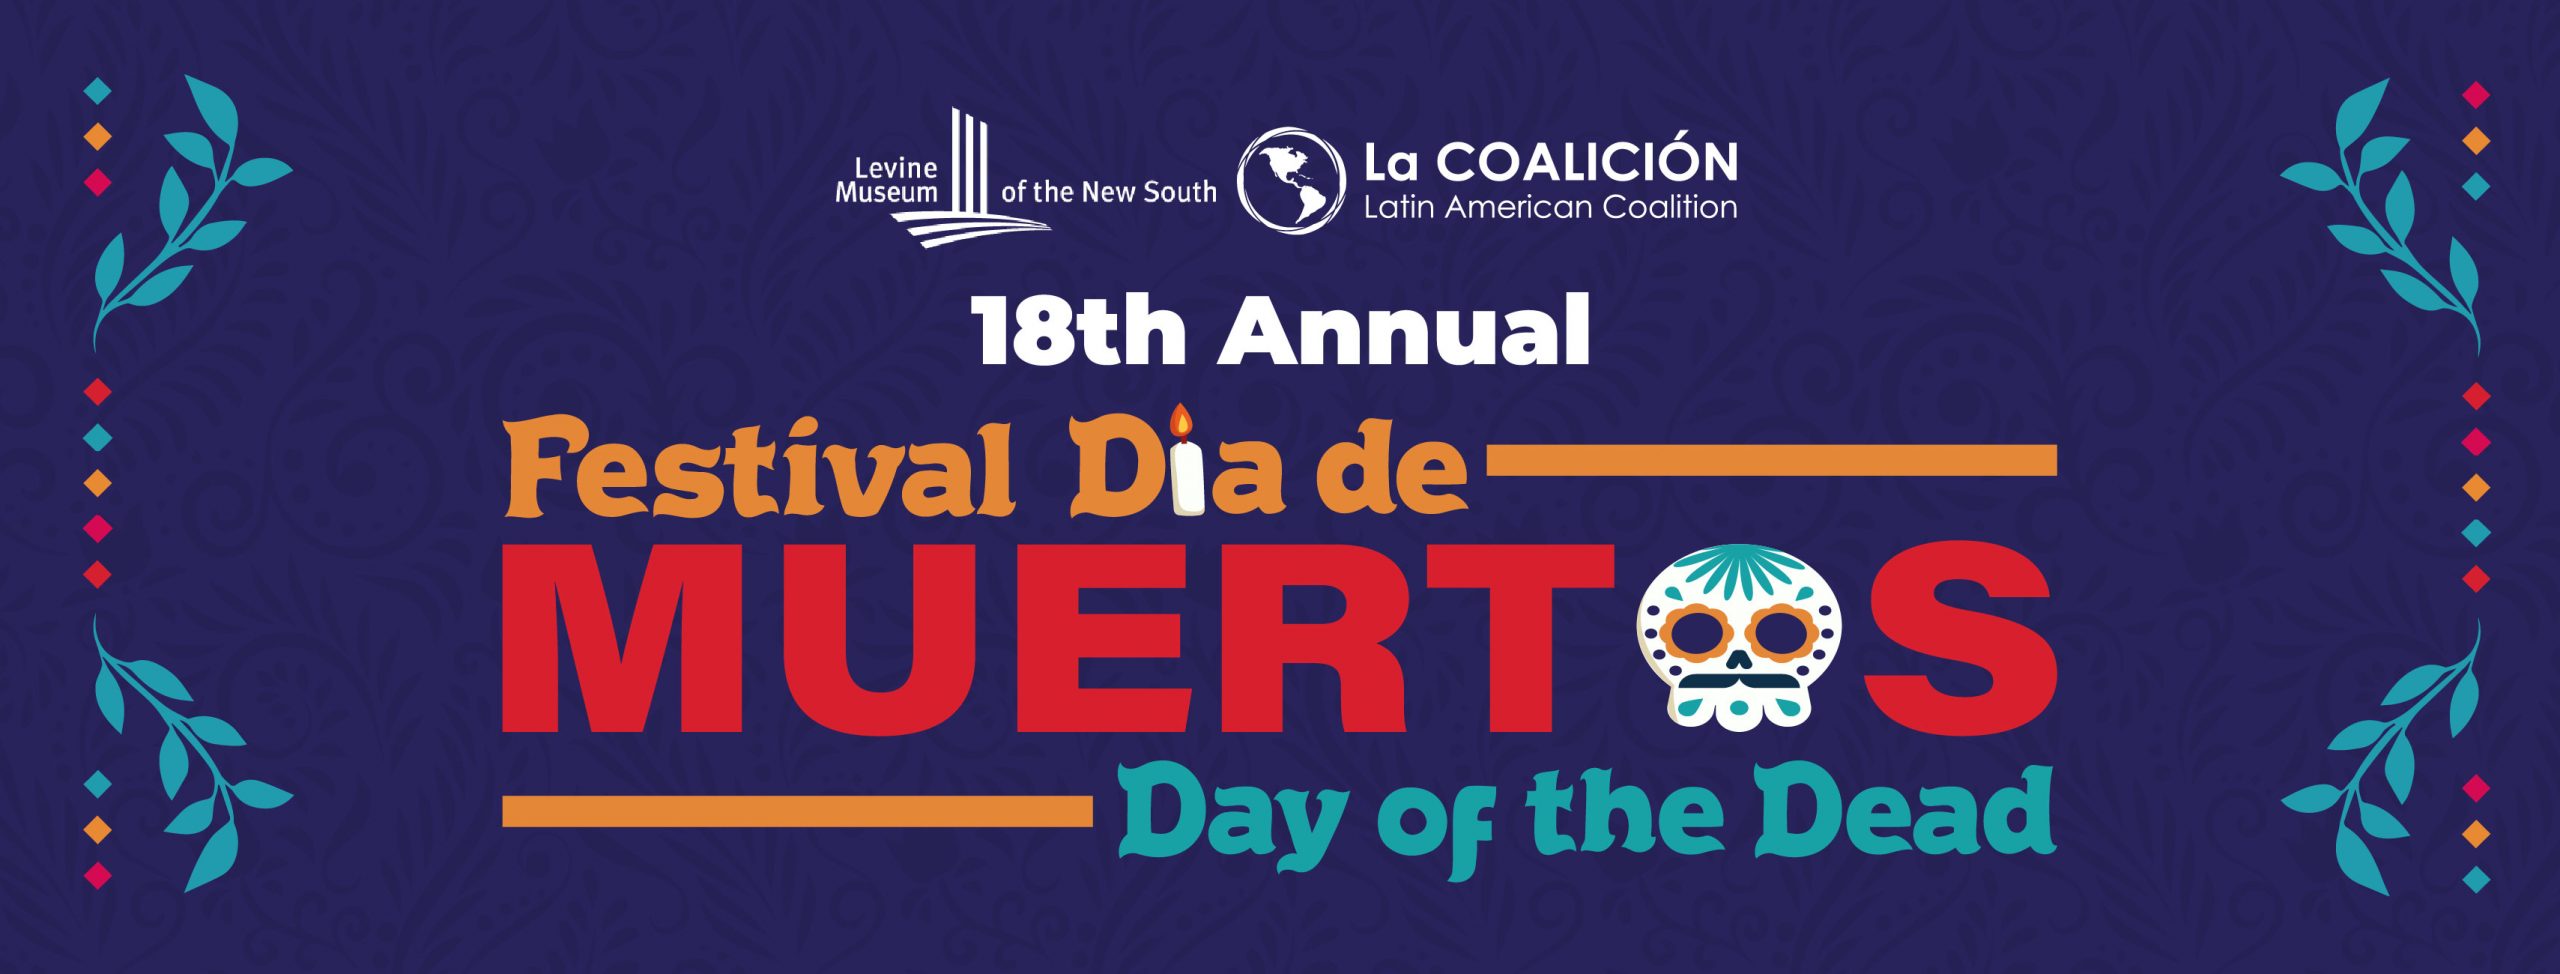 Levine Museum of the New South Festival Dia De Muertos- Day Of the Dead Event Image